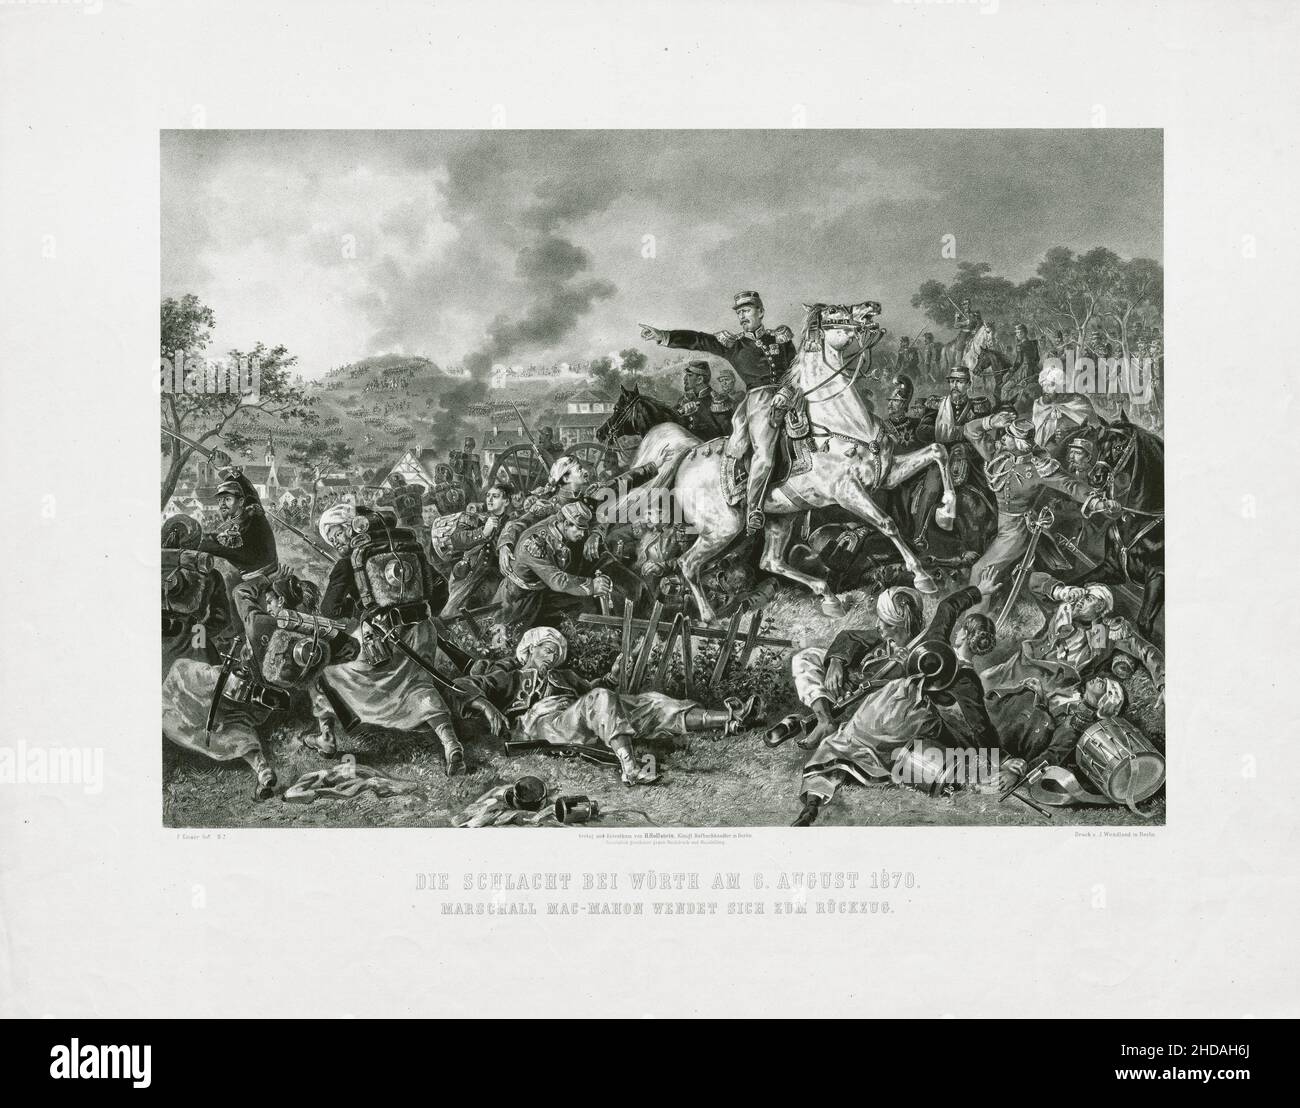 Vintage lithography of Franco-Prussian War: The Battle of Wörth on August 6, 1870, Marshal Mac-Mahon turns to retreat. 1872 Stock Photo